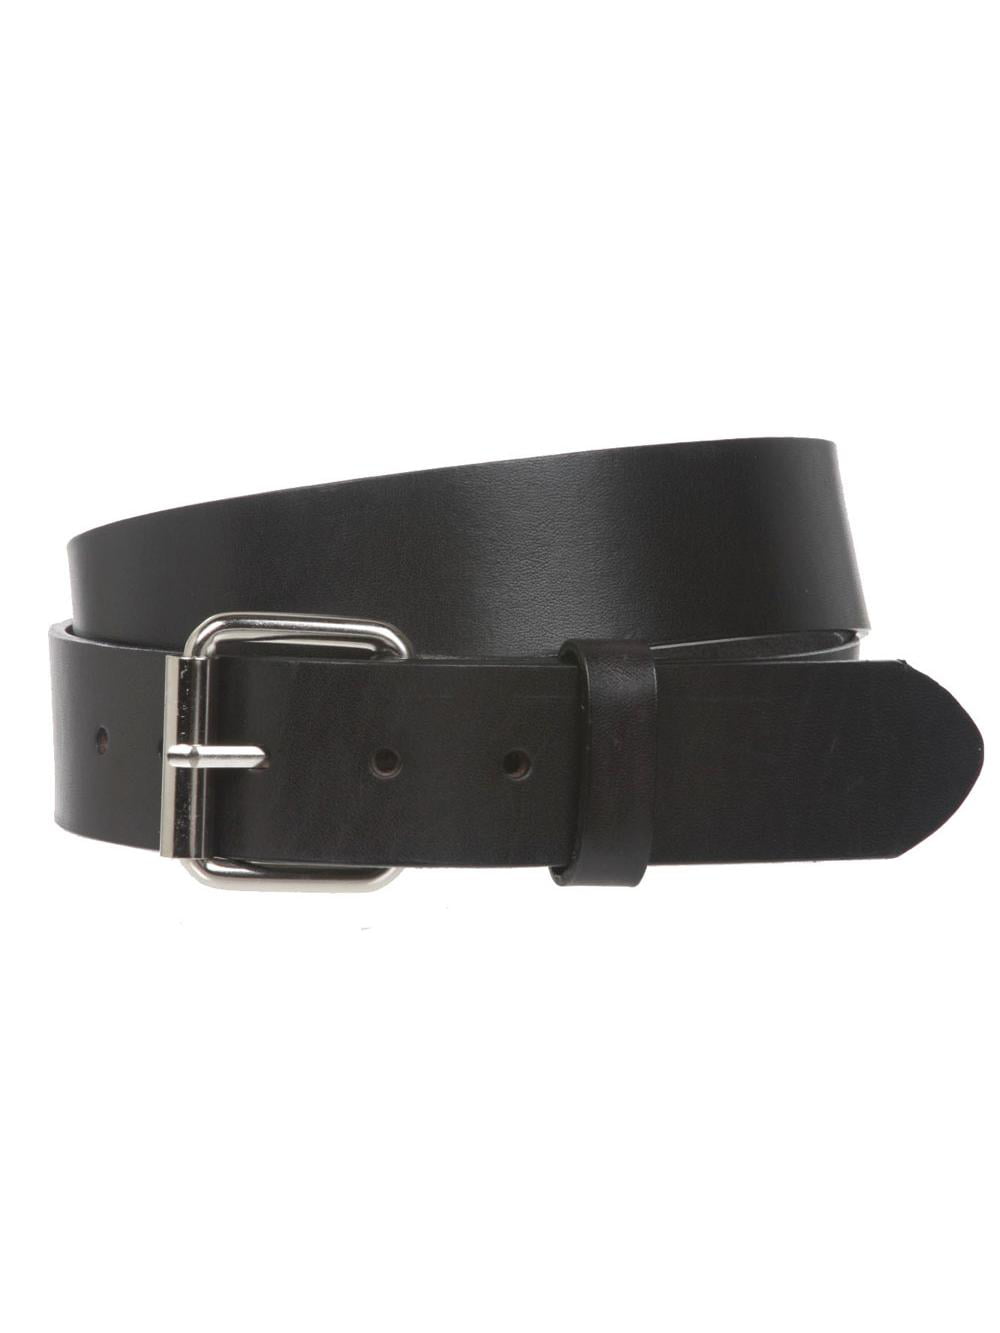 Unisex Men's Womens New Plain Leather Belt Snap-On Removable Roller Buckle Solid 